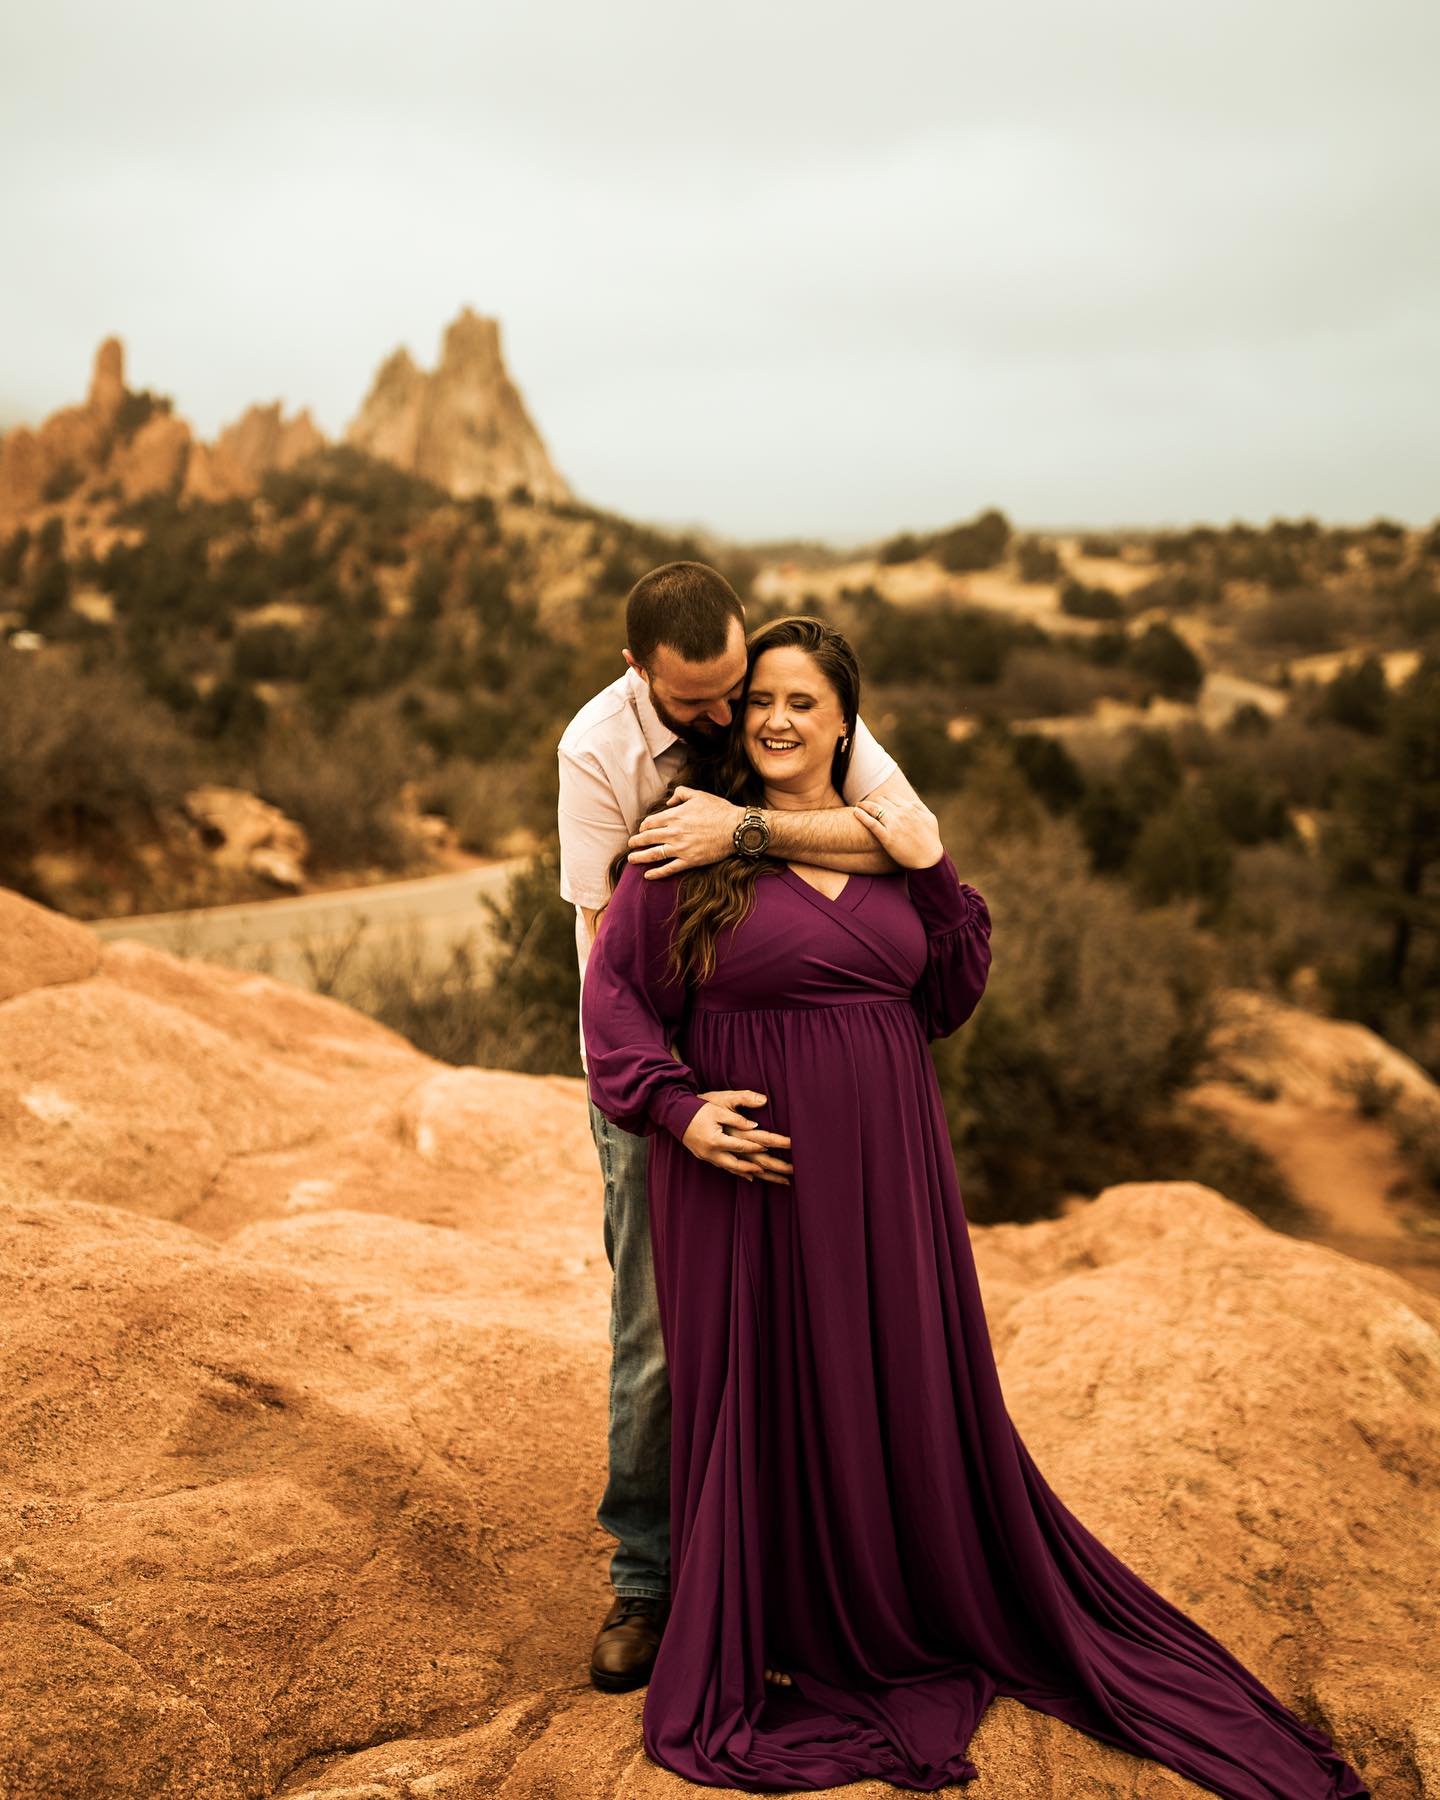 Maternity photos with couples that started as wedding clients make me extra emotional 🥺🥹 So excited for these two! 

-
-
-
-
-
-
#coloradospringsfamilyphotographer #denverfamilyphotographer #coloradomaternityphotographer #gardenofthegods #colorados